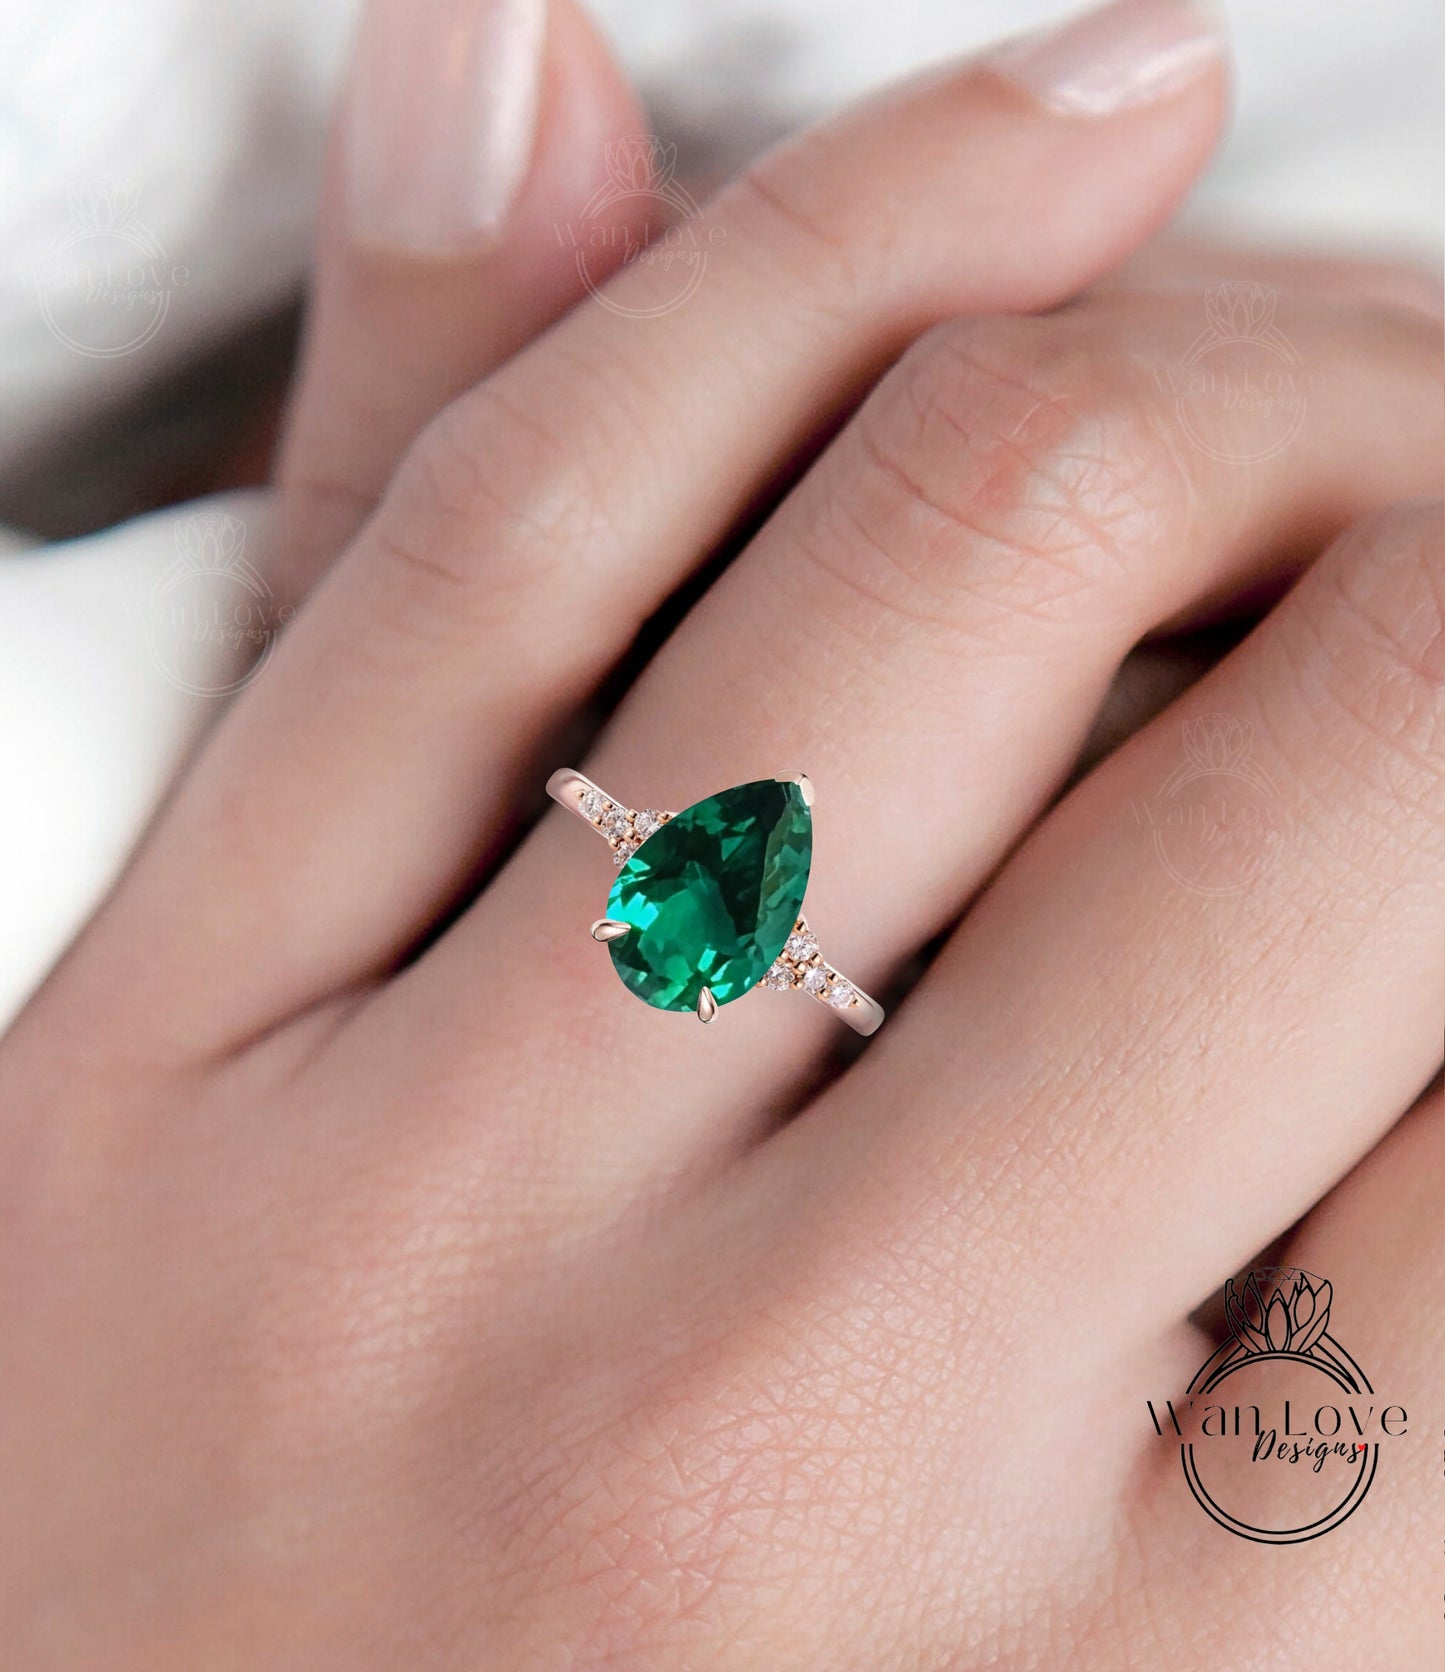 Emerald Pear engagement ring vintage unique Cluster rose gold engagement ring women Round diamond wedding Bridal art deco Anniversary